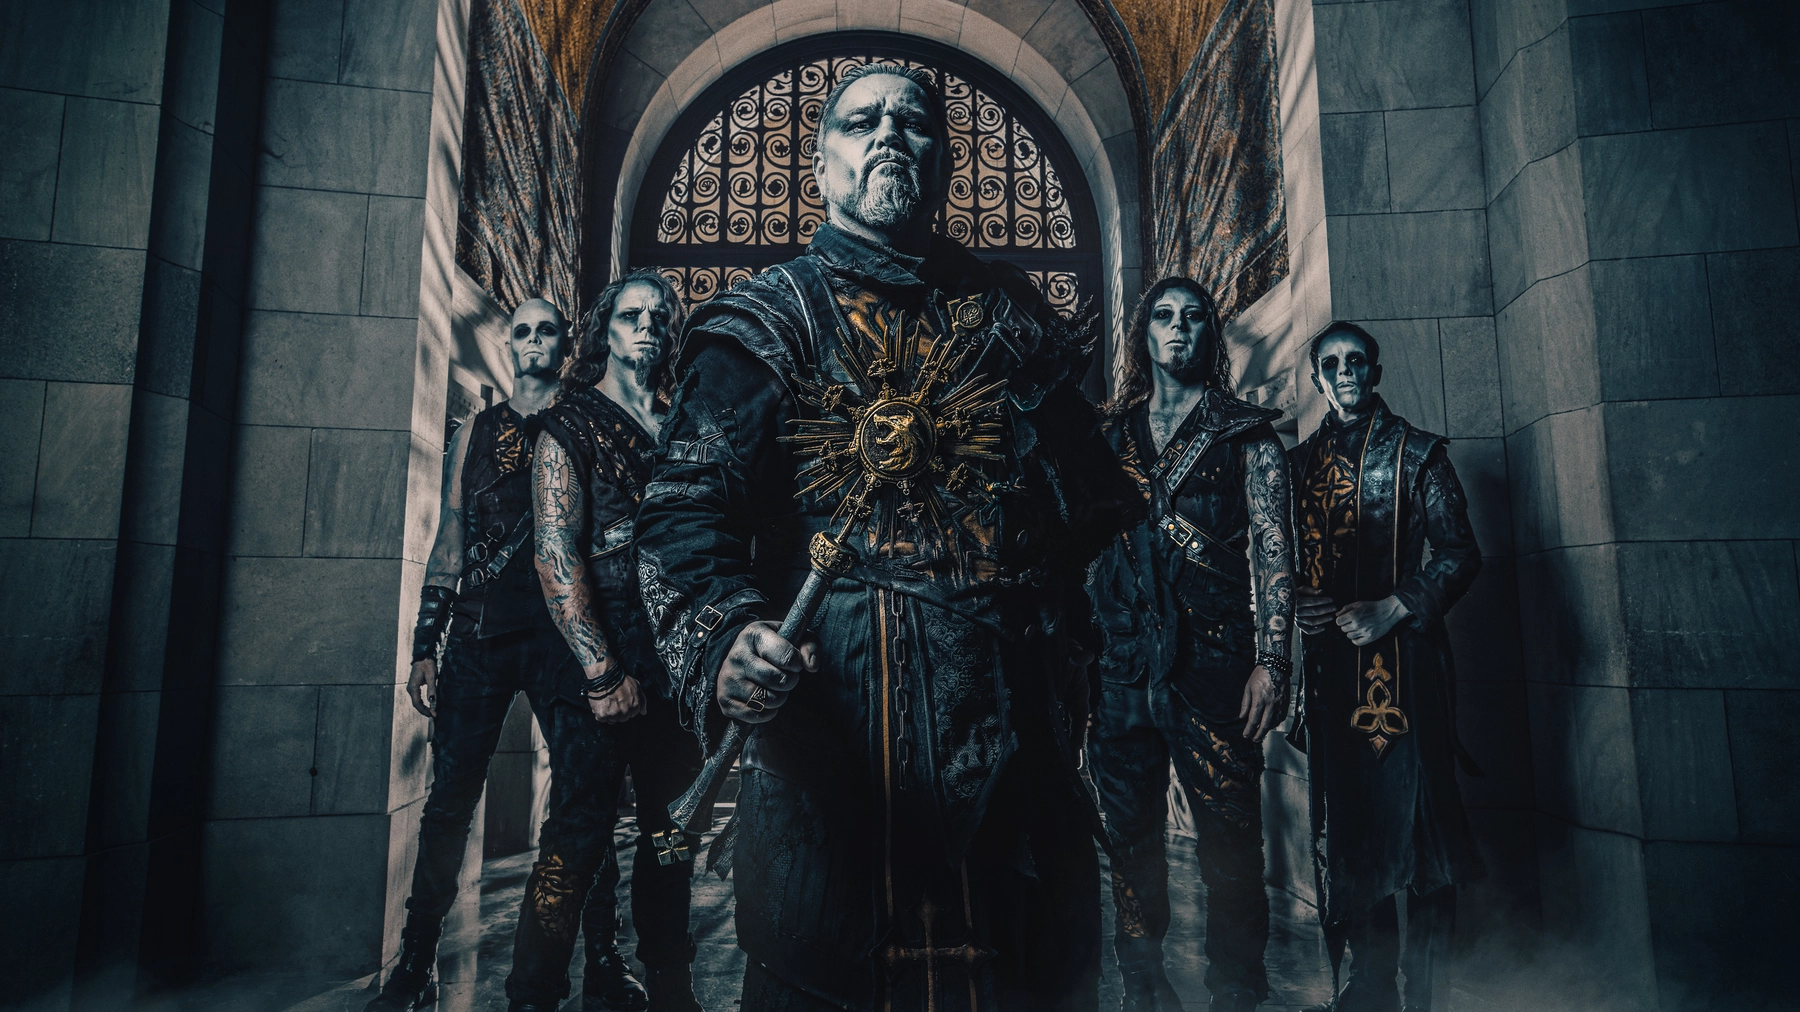 Powerwolf at THE HALL